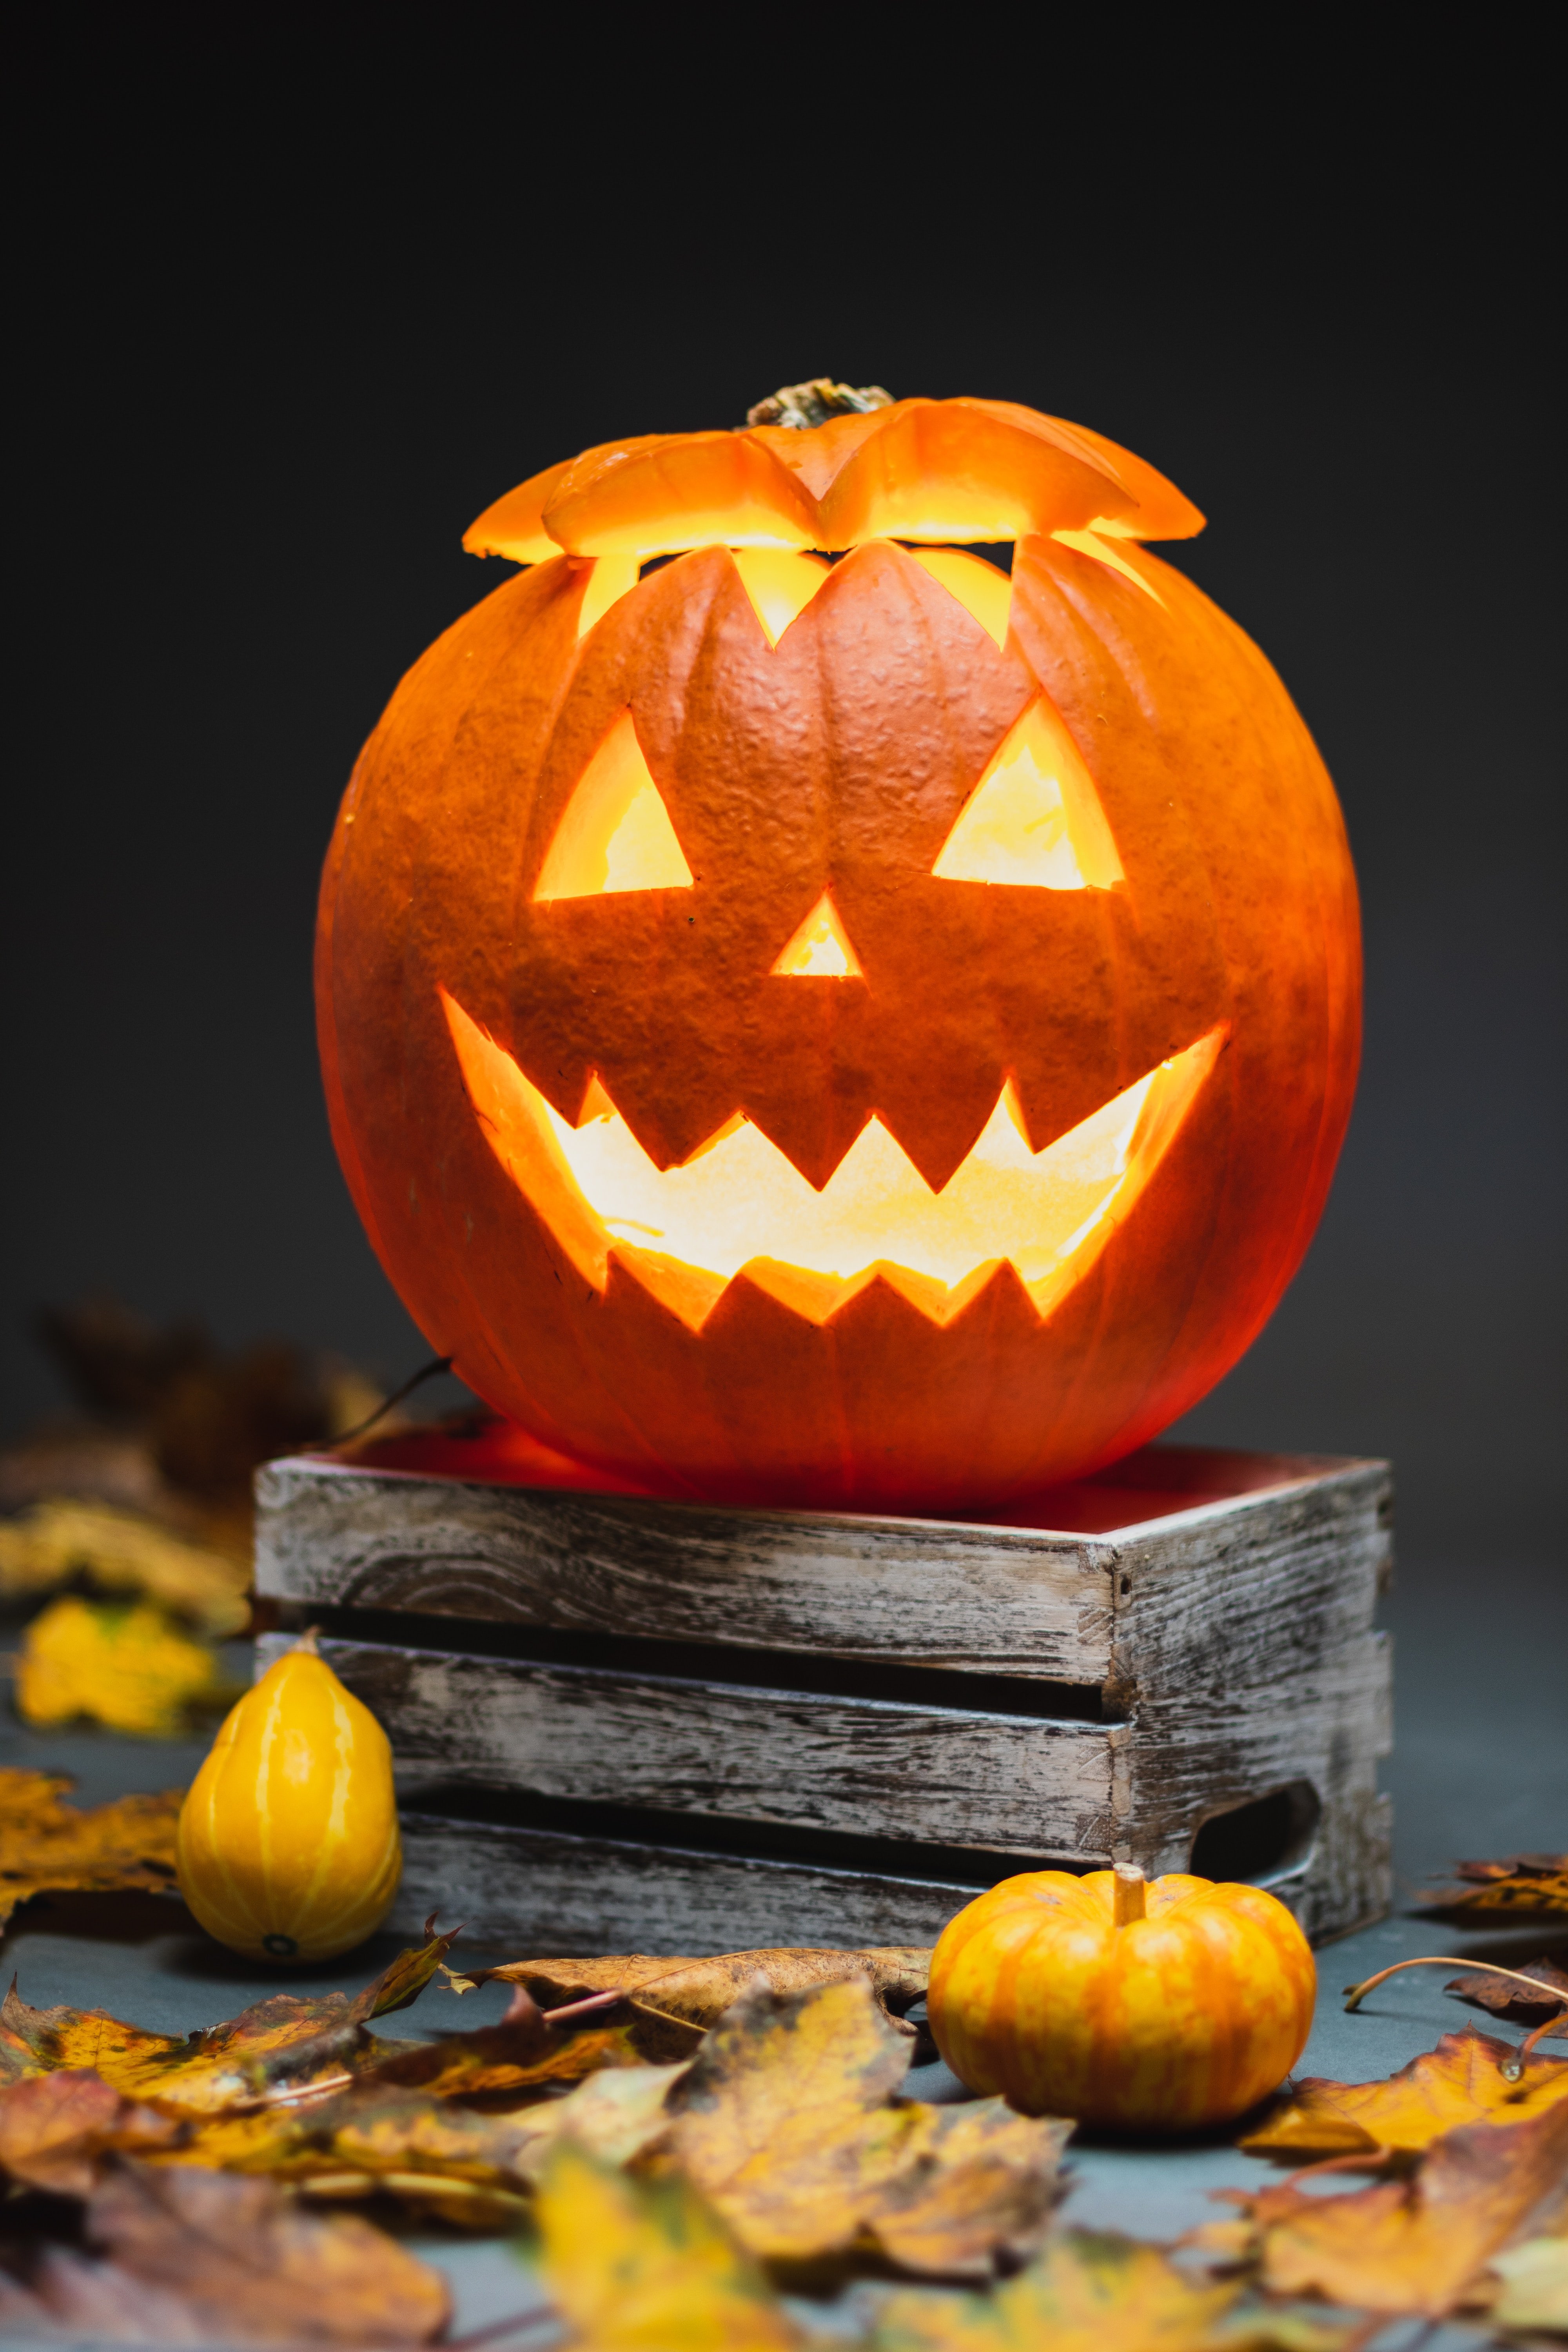 Popular Halloween Events in Seattle (Something for Everyone)